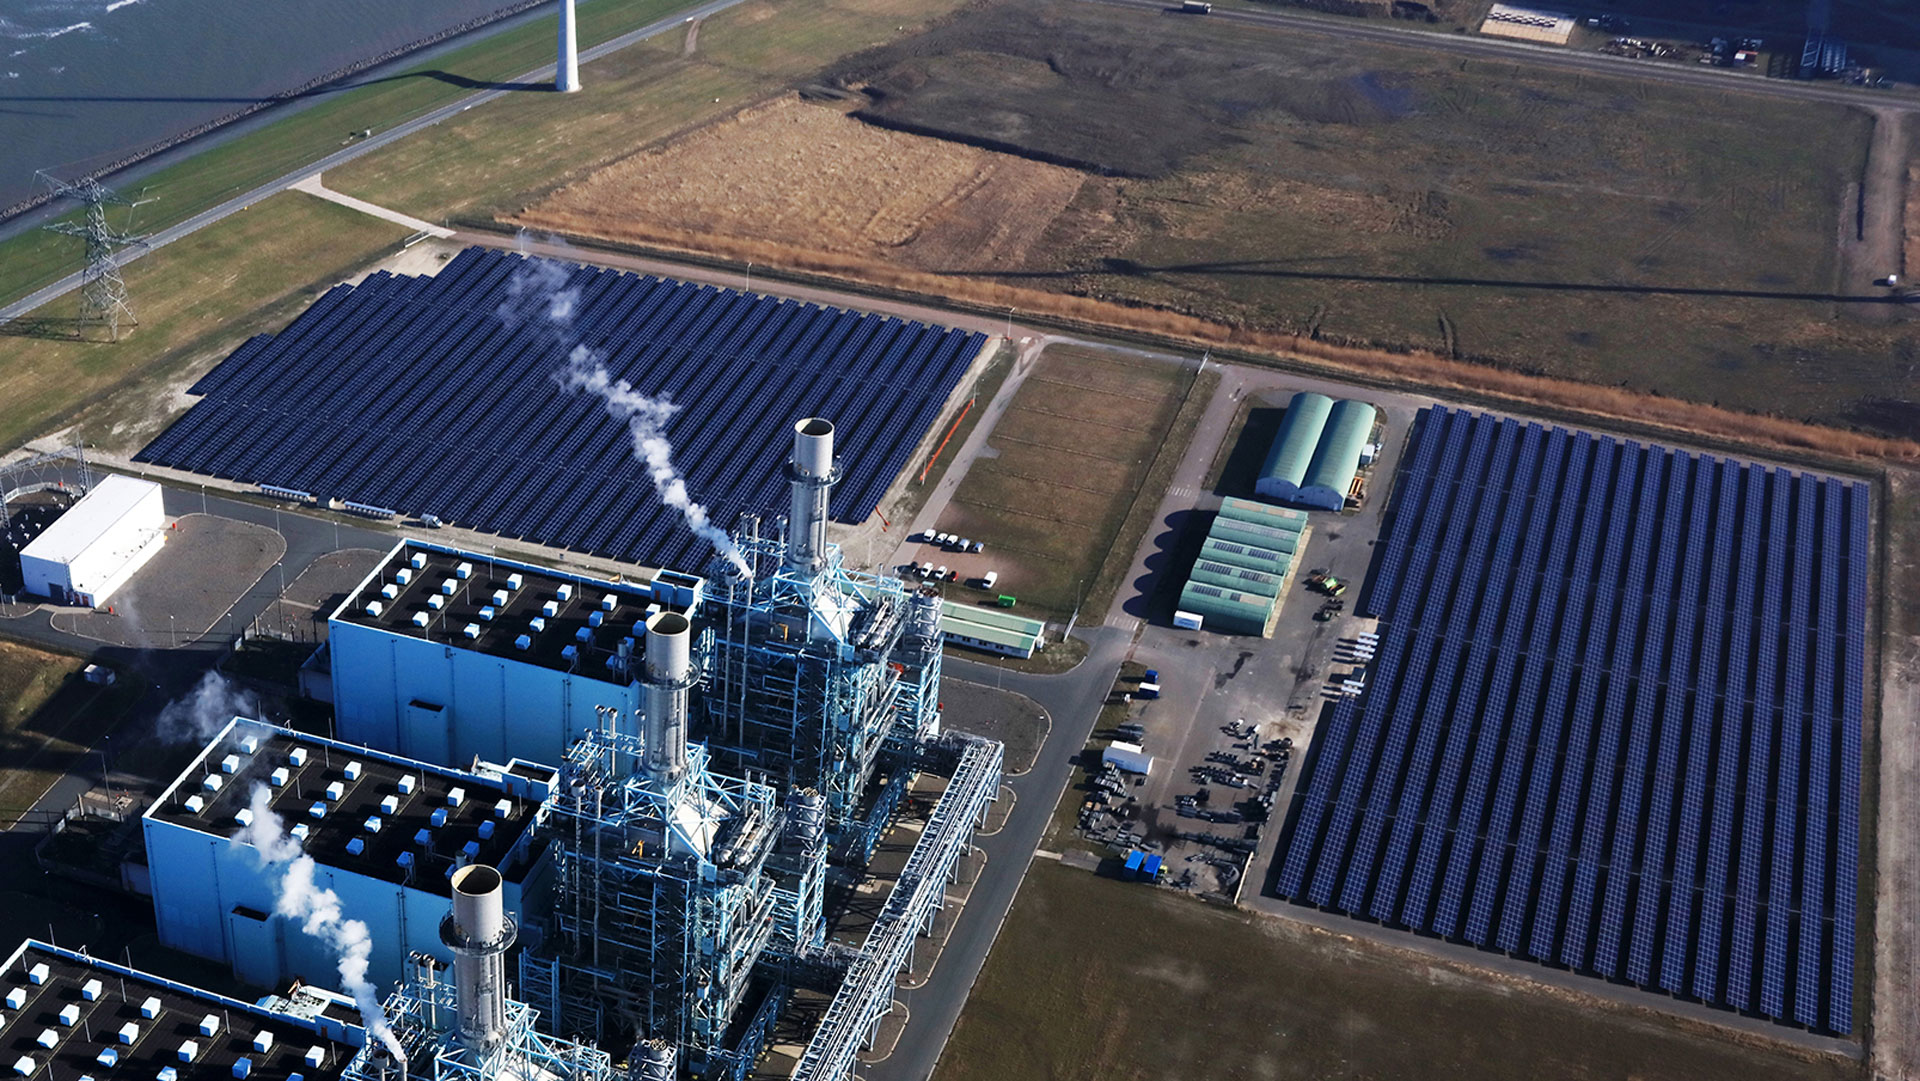 Crowdfunded 5.7 MW solar farm co-located with the Magnum gas power plant.